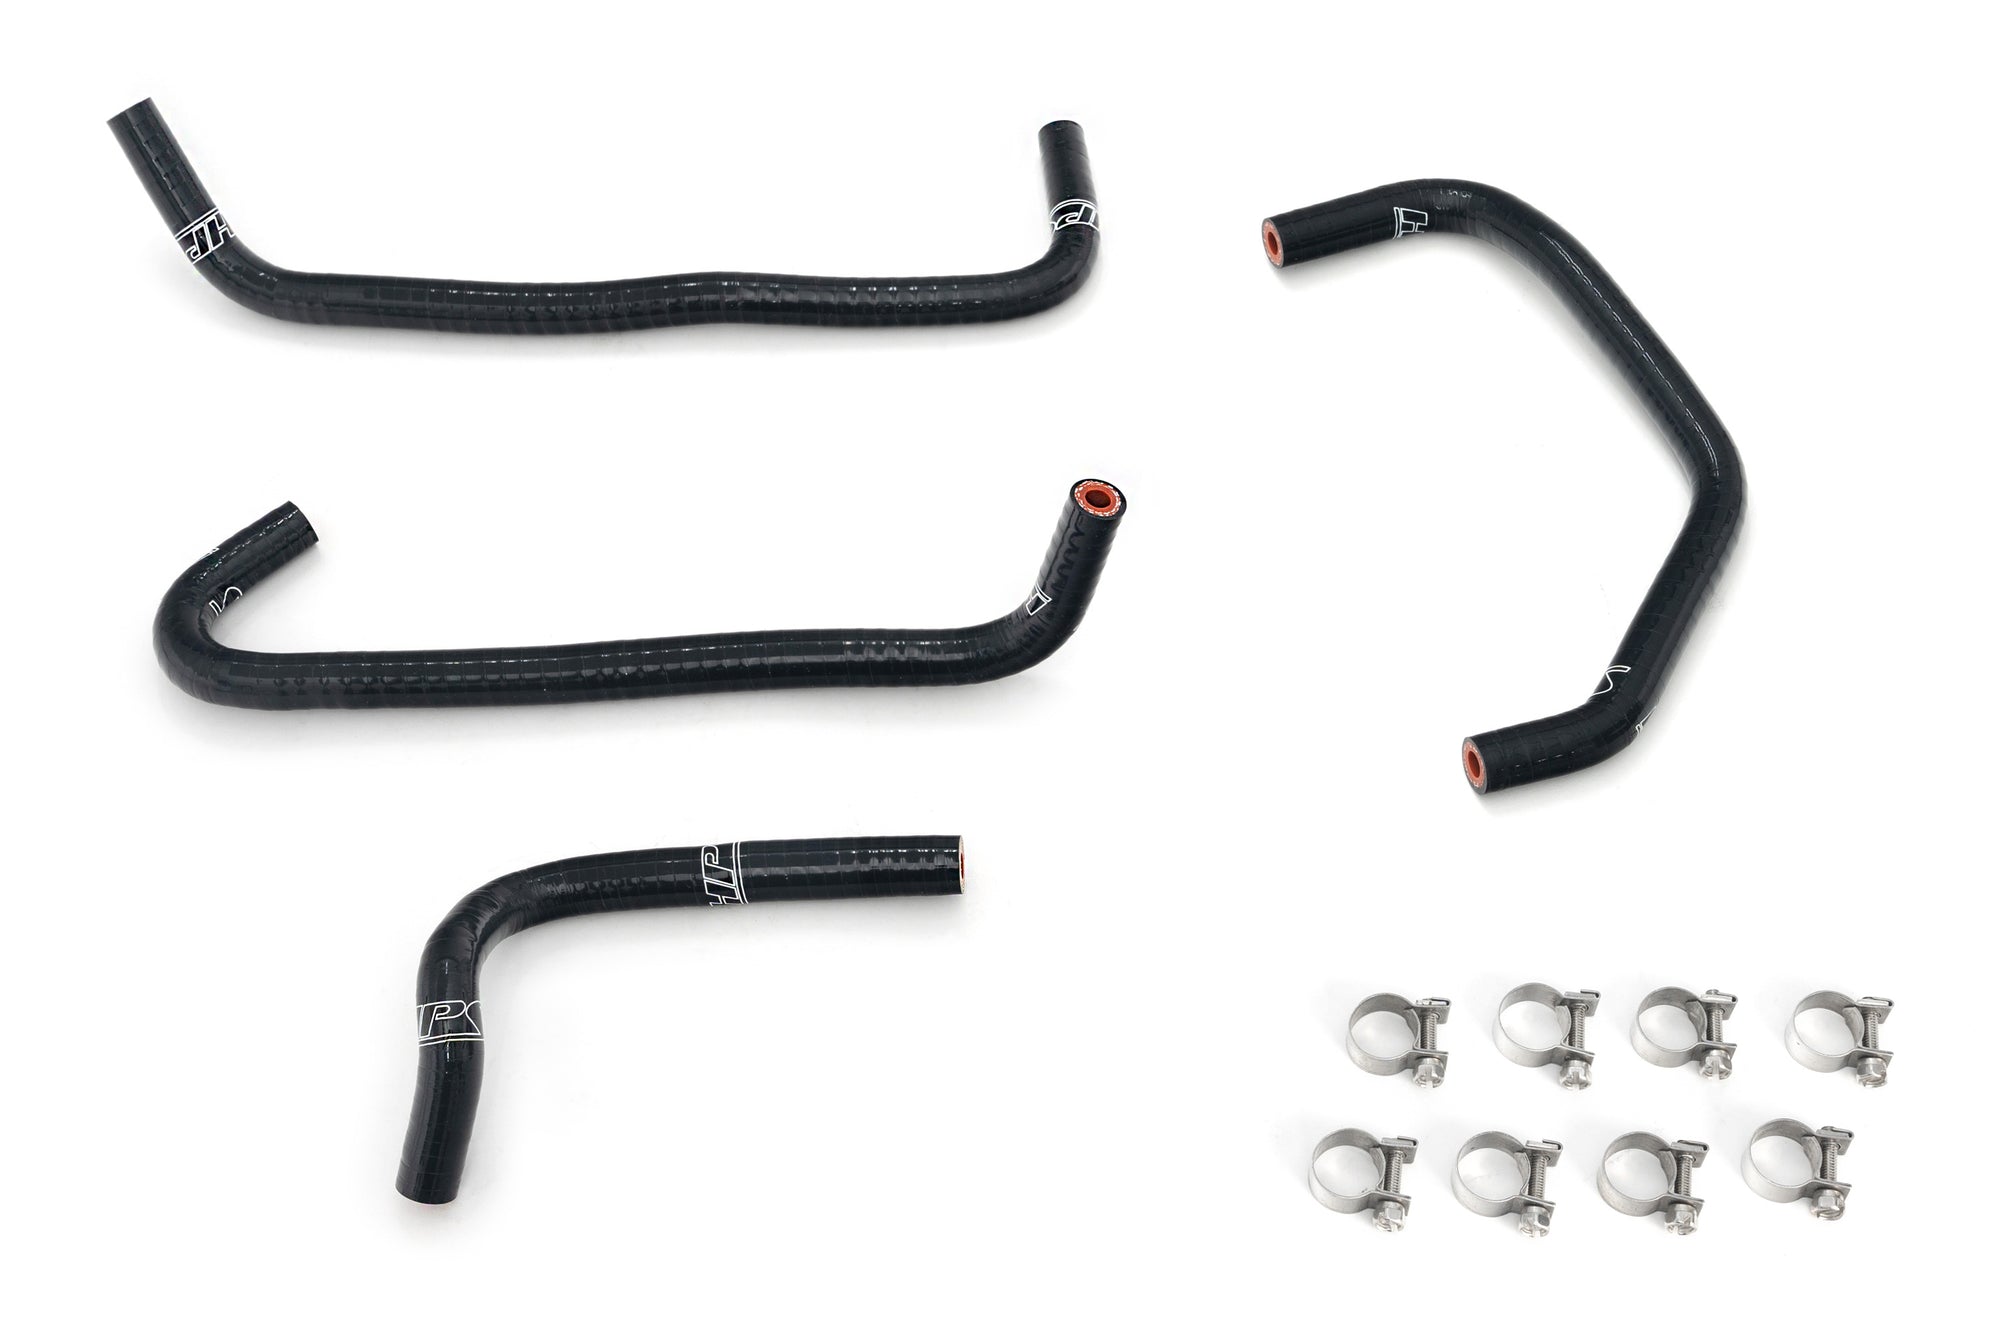 HPS Silicone Ancillary Coolant Hose Kit 57-2156-BLK replaces 94-97 Mazda Miata NA8 thermostat bypass, throttle body, air control valve, and oil cooler hoses